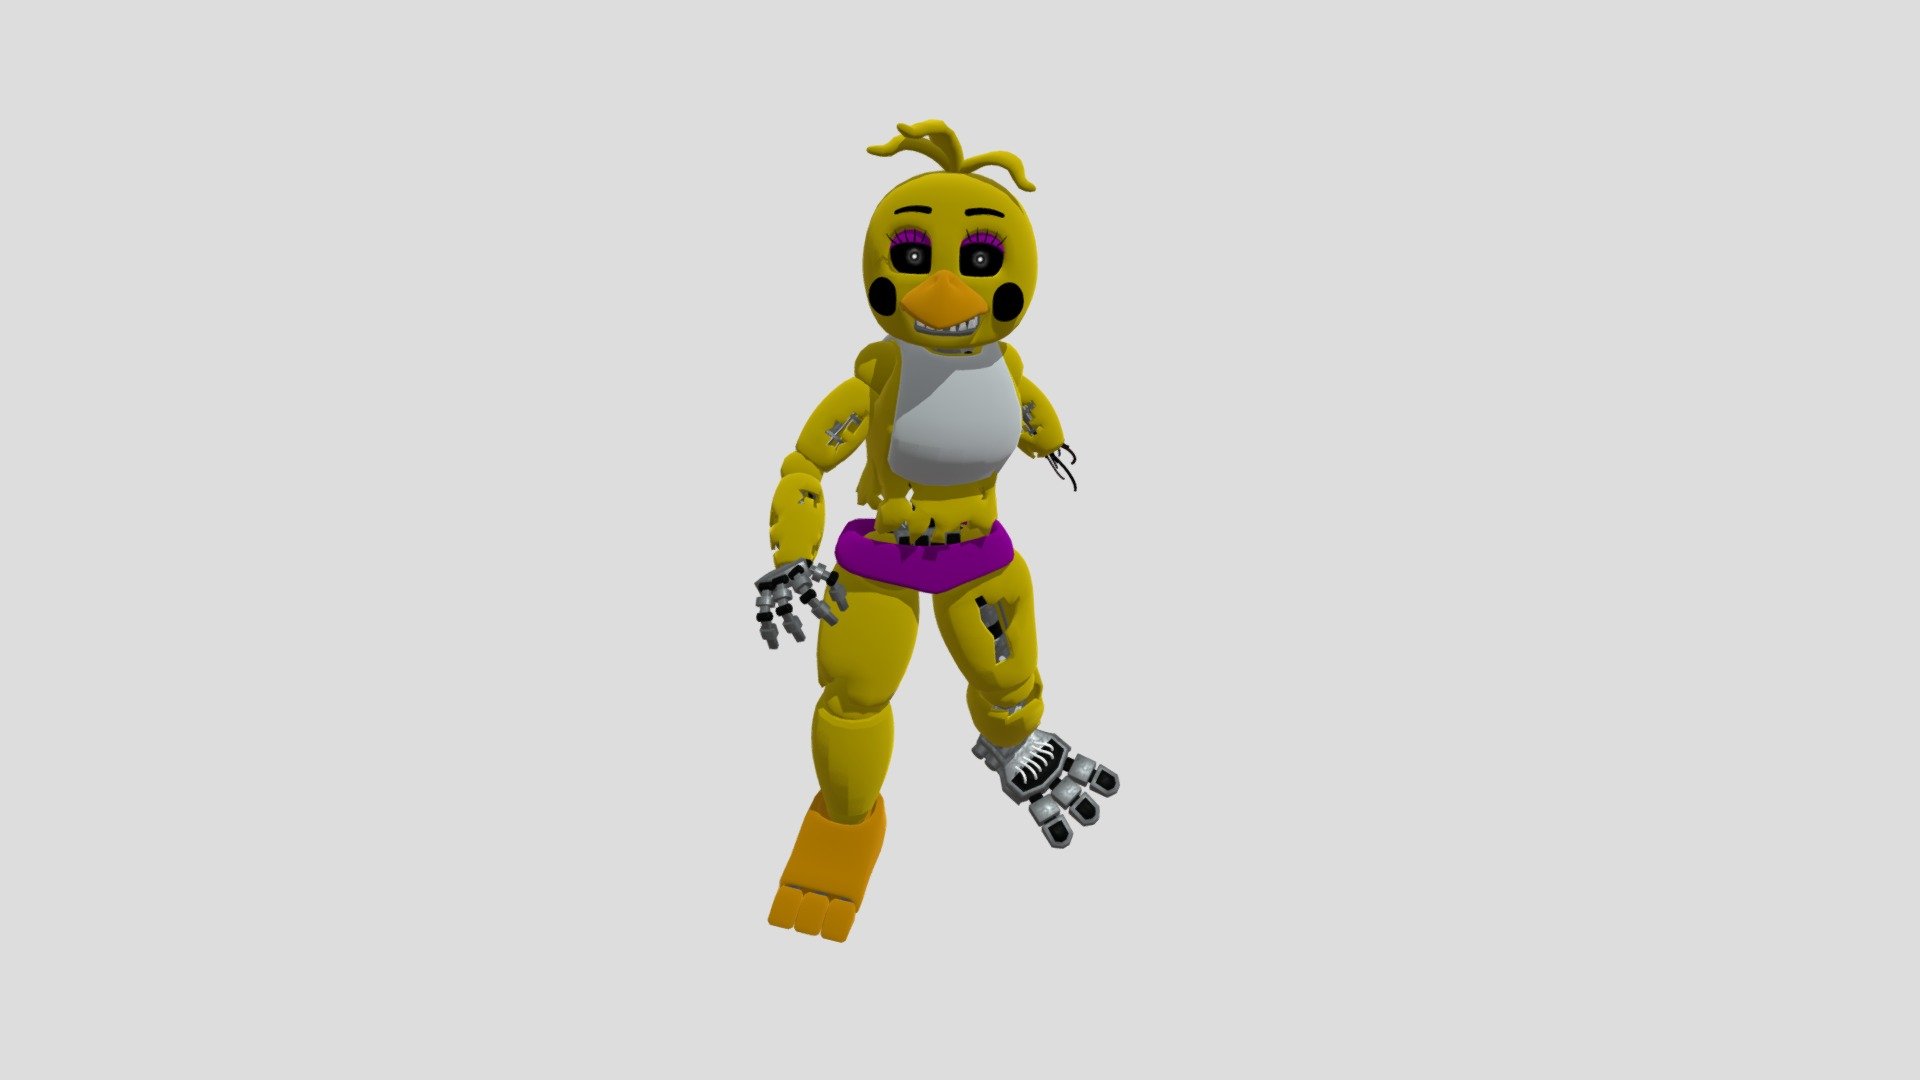 LEGO Chica, Toy Chica, Withered Chica & Phantom Chica (FNA…